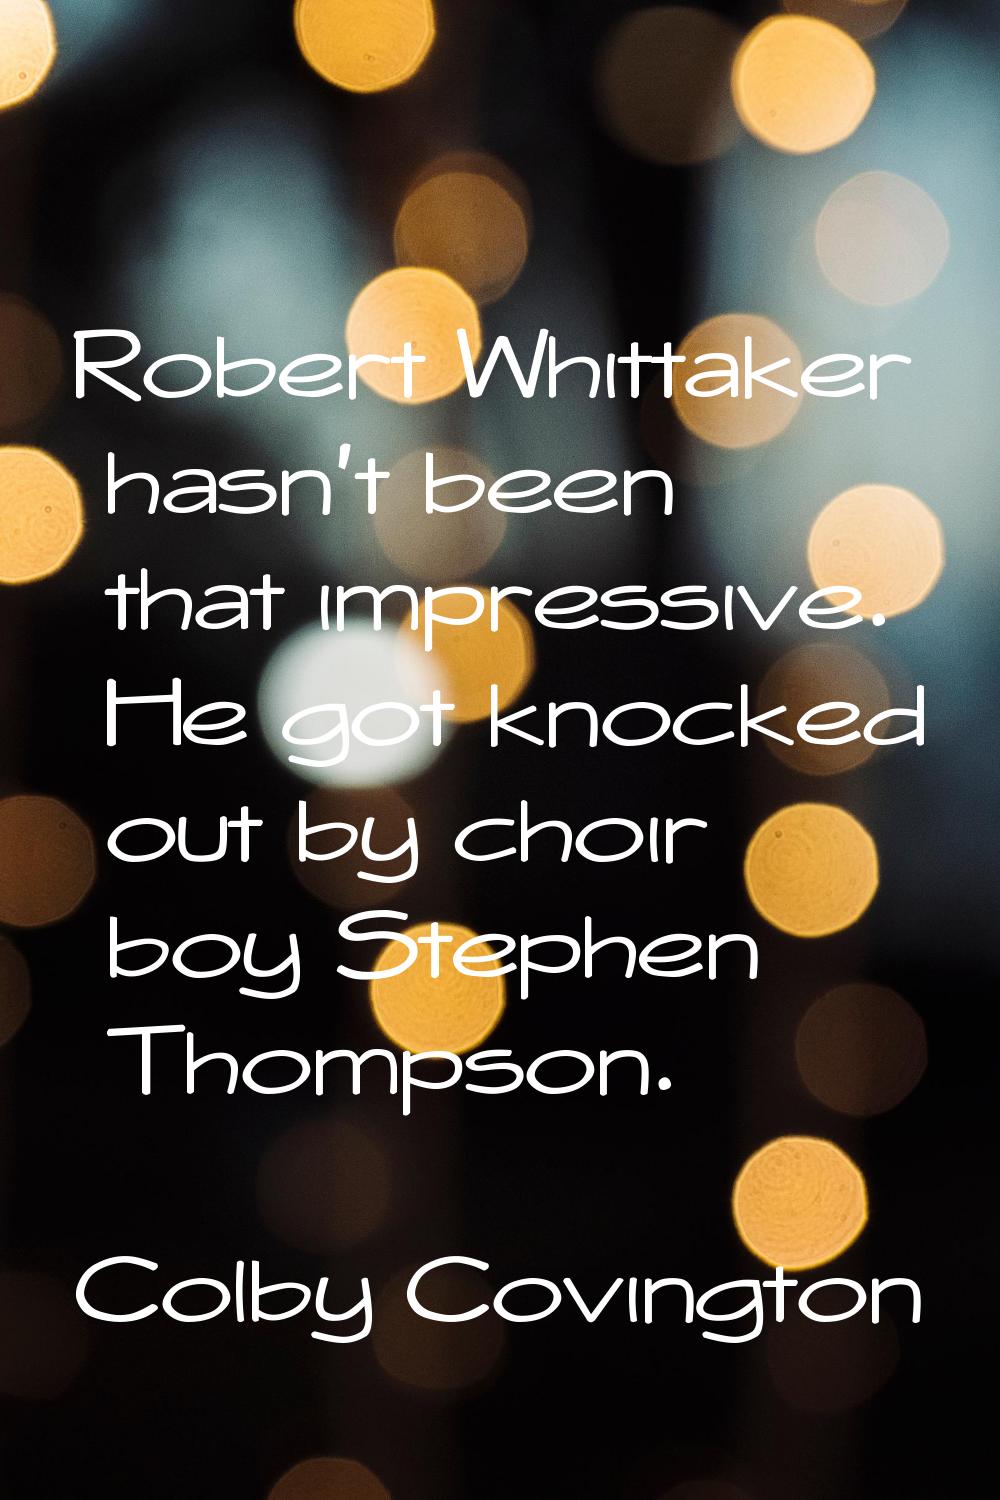 Robert Whittaker hasn't been that impressive. He got knocked out by choir boy Stephen Thompson.